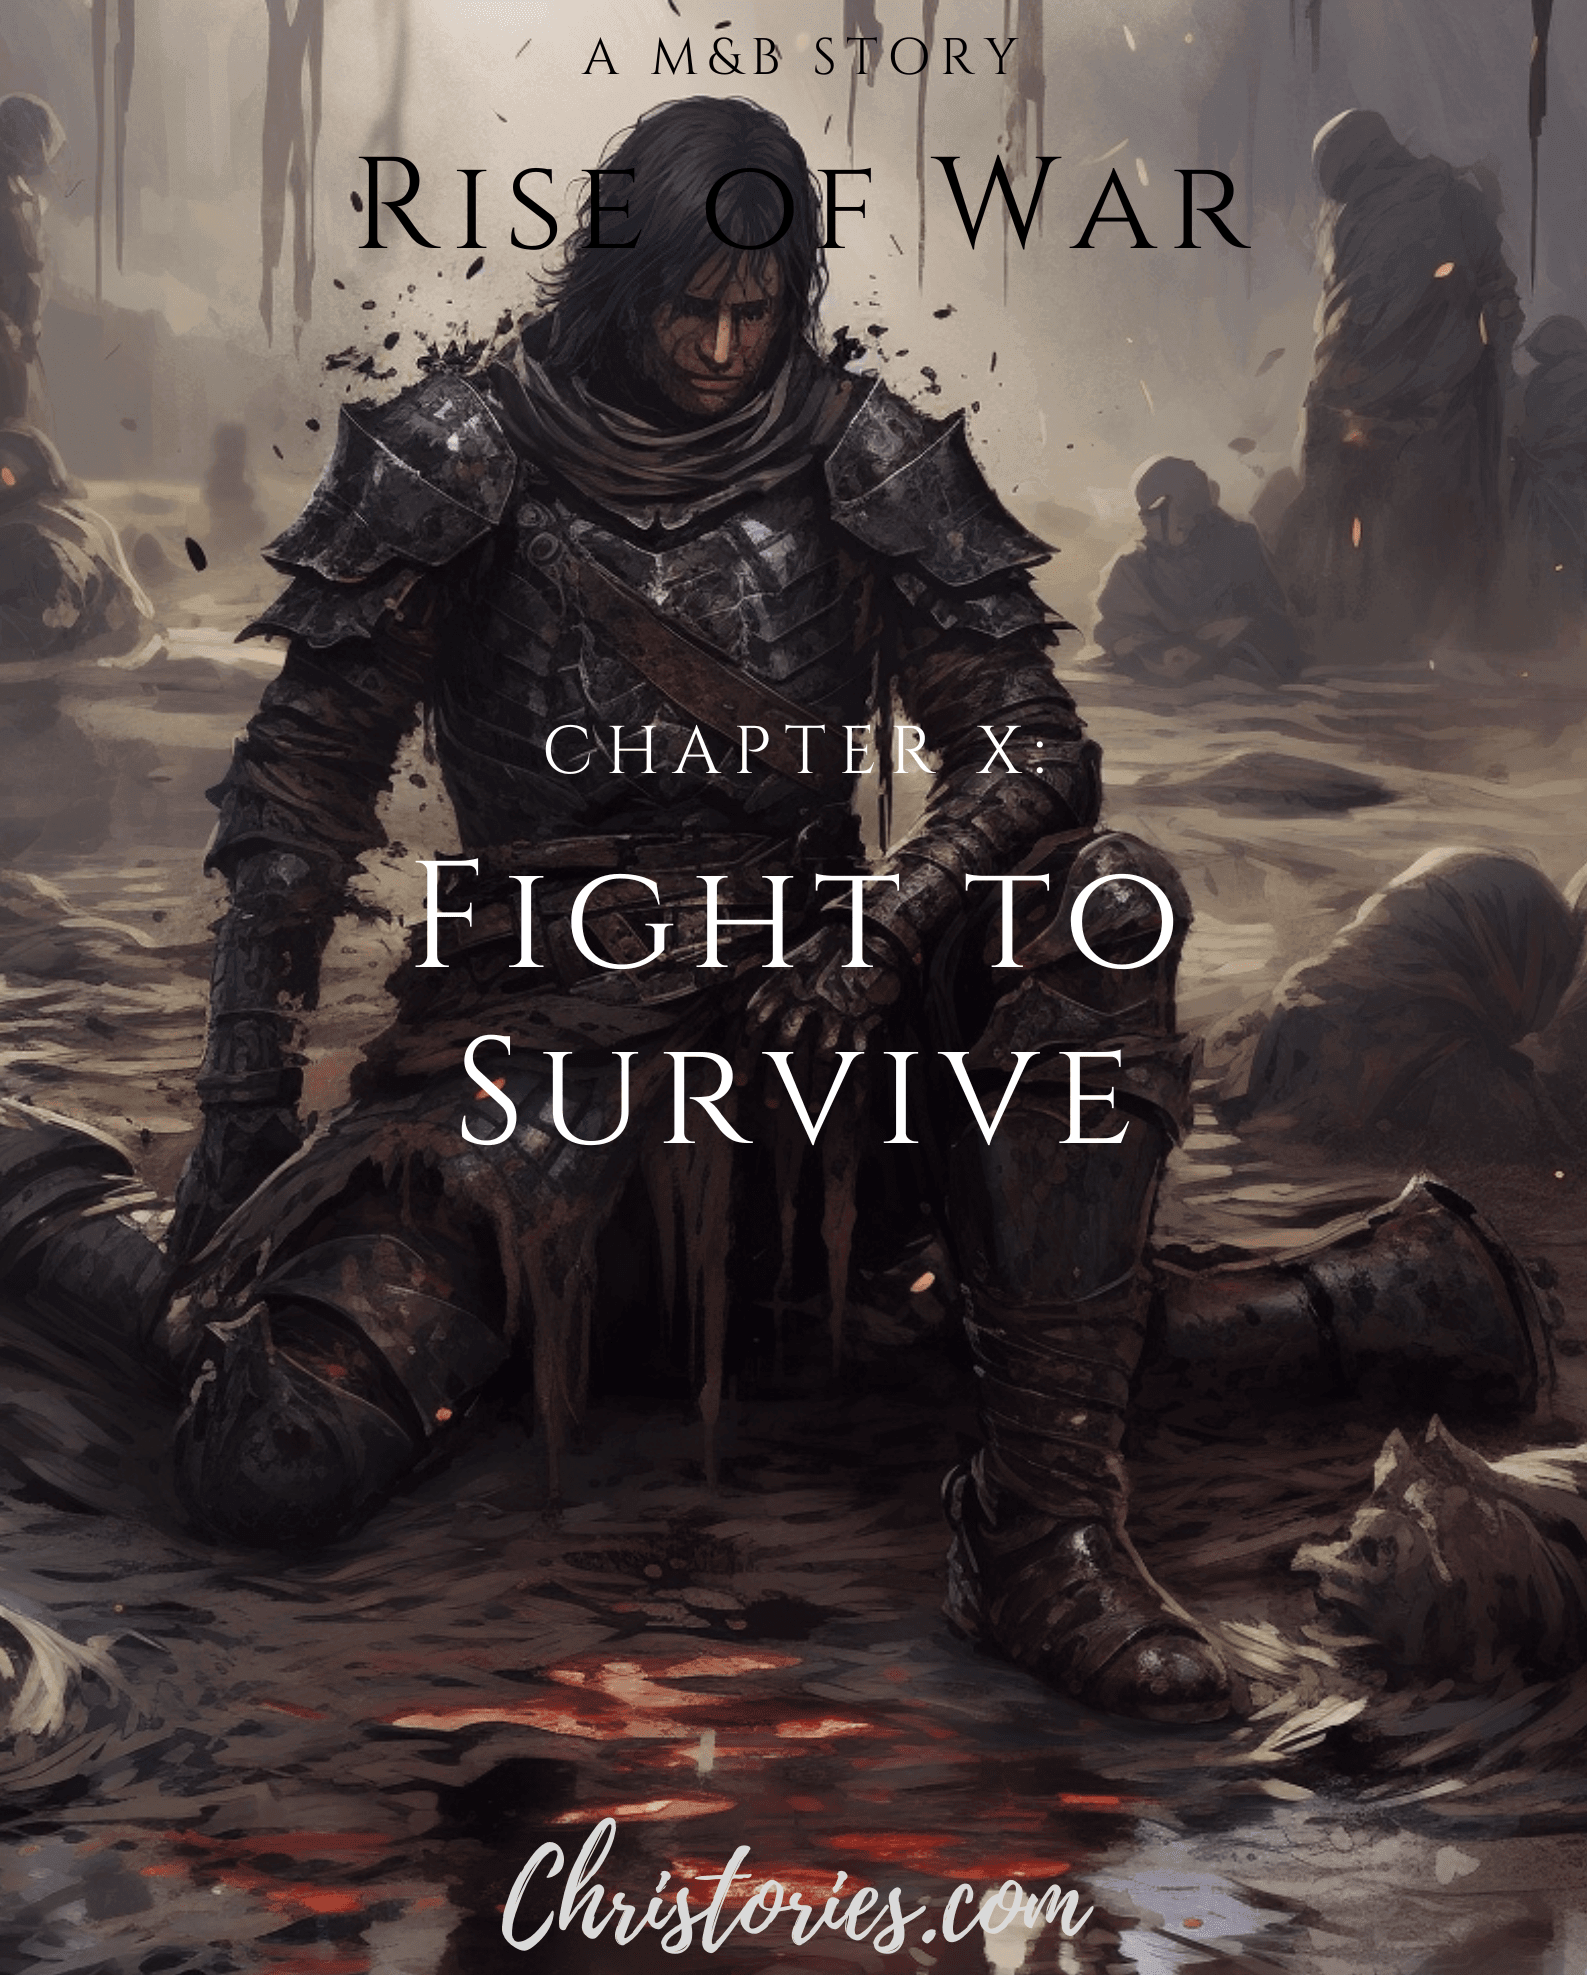 Mount And Blade: Rise Of War, Chapter X – Fight To Survive